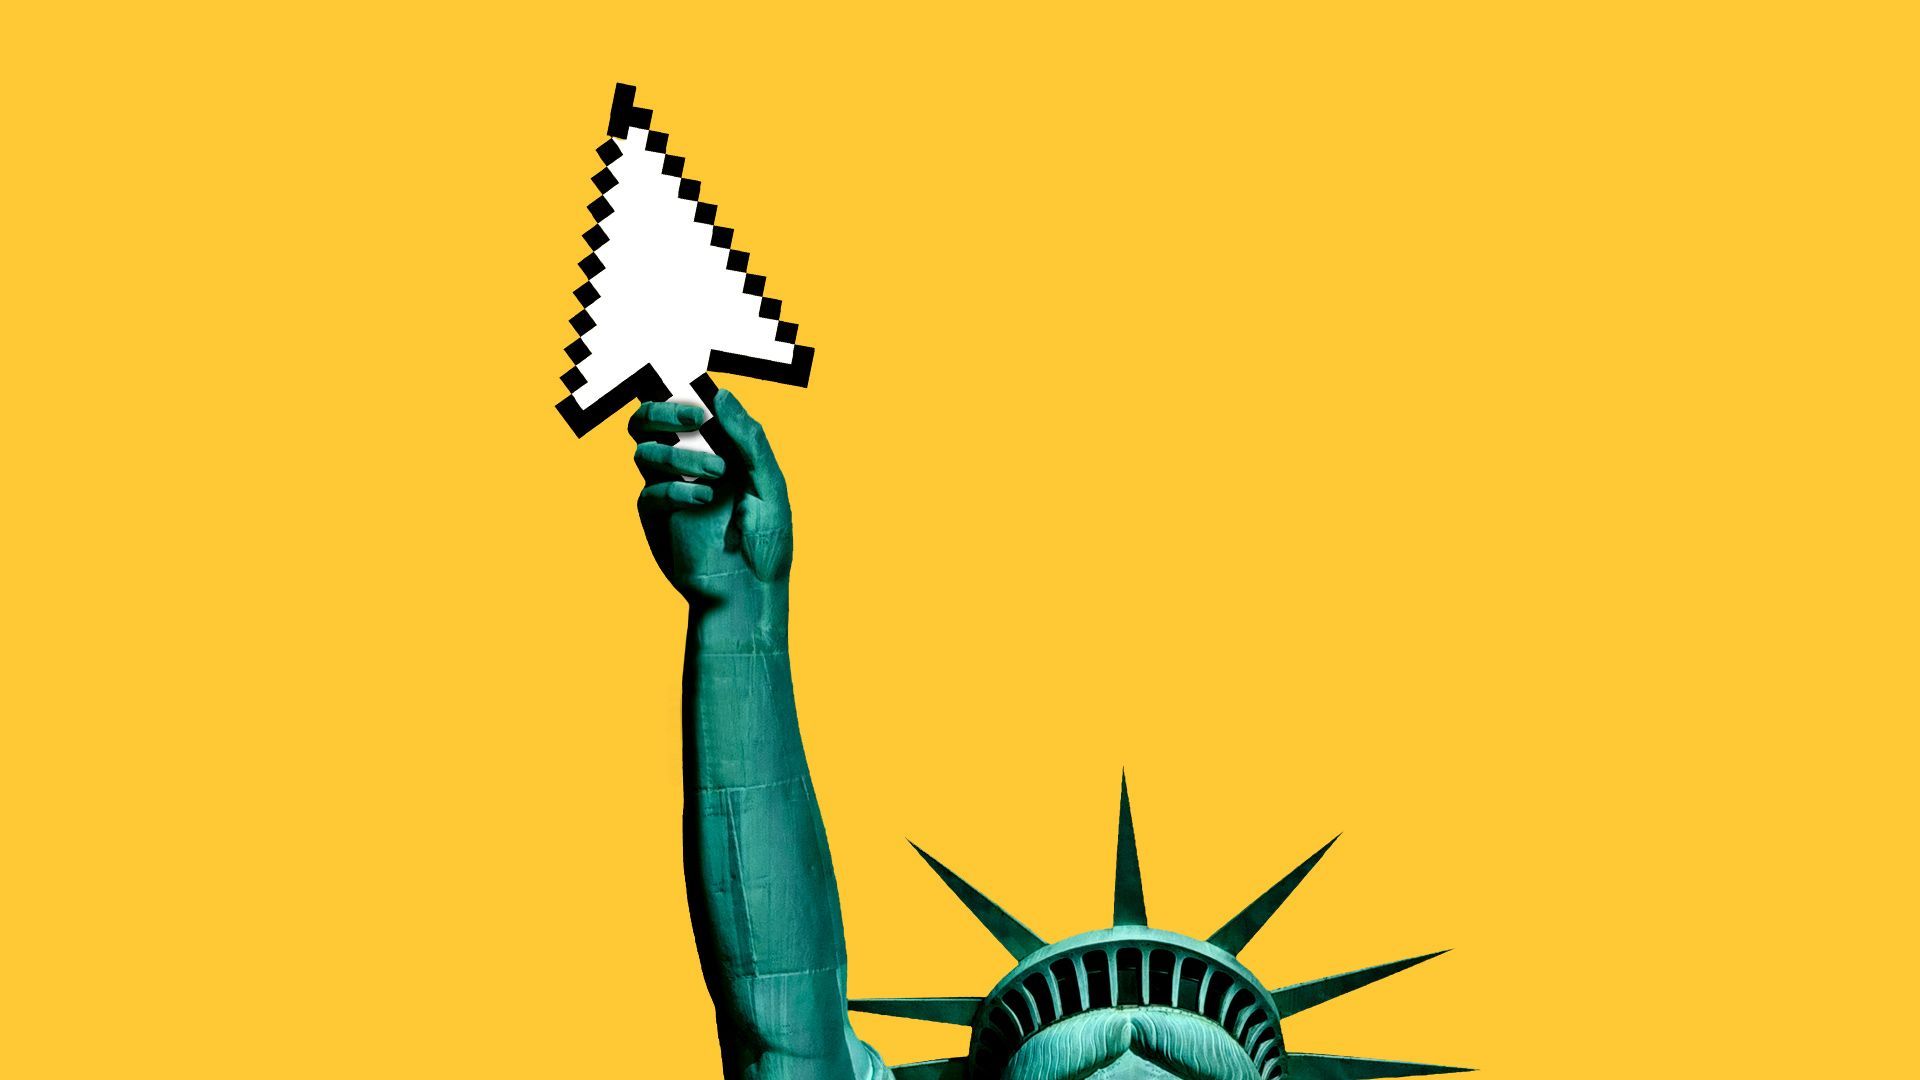 Illustration of the Statue of Liberty holding an arrow cursor instead of a torch. 